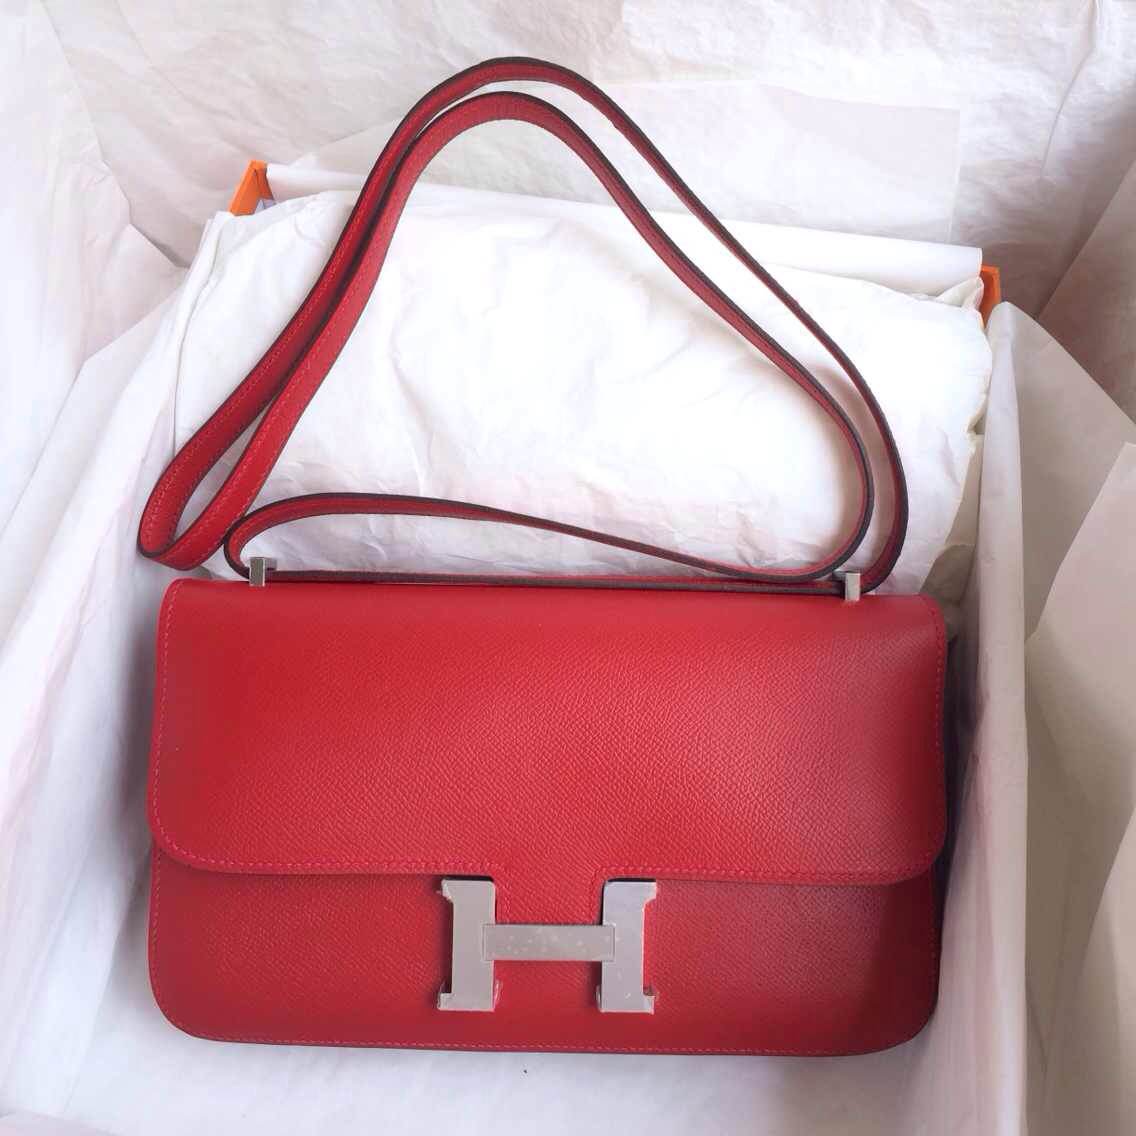 Hermes Constance Bag 26cm Q5 Candy Red Epsom Leather Silver/Gold ...